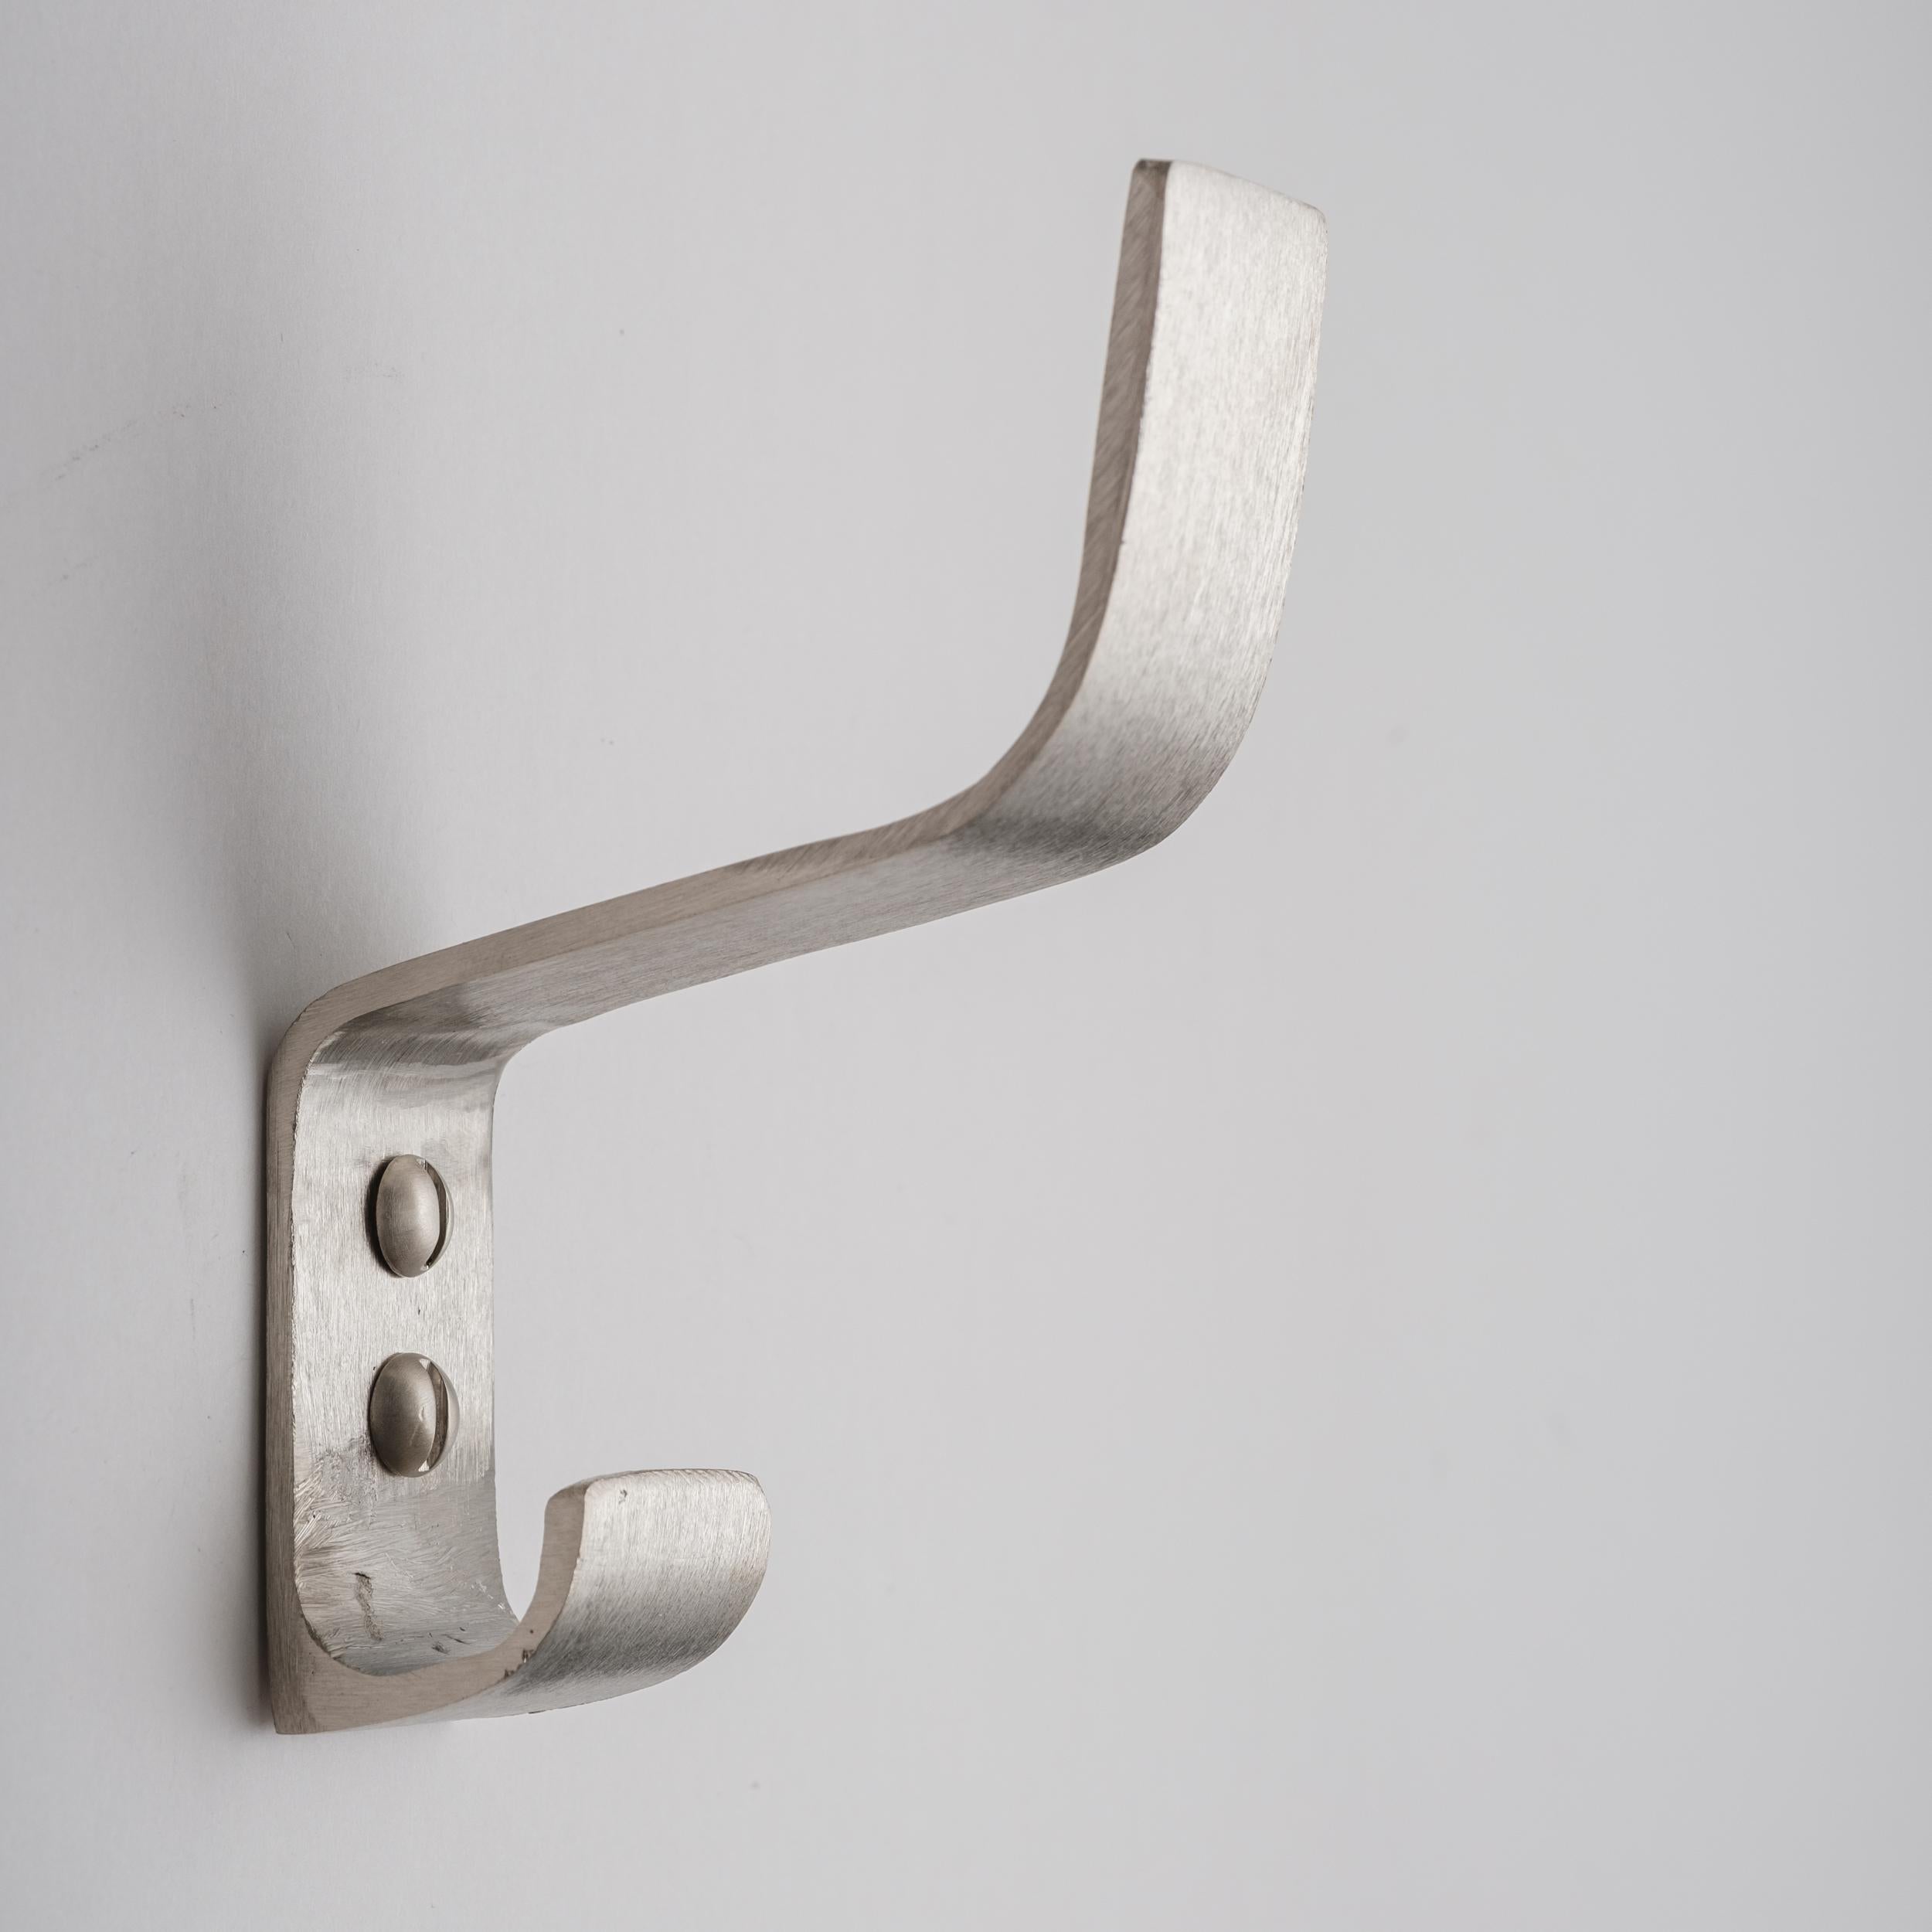 Carl Auböck model #5261 hook in nickel. Designed in the 1950s, this versatile and Minimalist Viennese hook is executed in softly brushed nickel by Werkstätte Carl Auböck, Austria. 

Produced by Carl Auböck IV in the original Auböck workshop in the